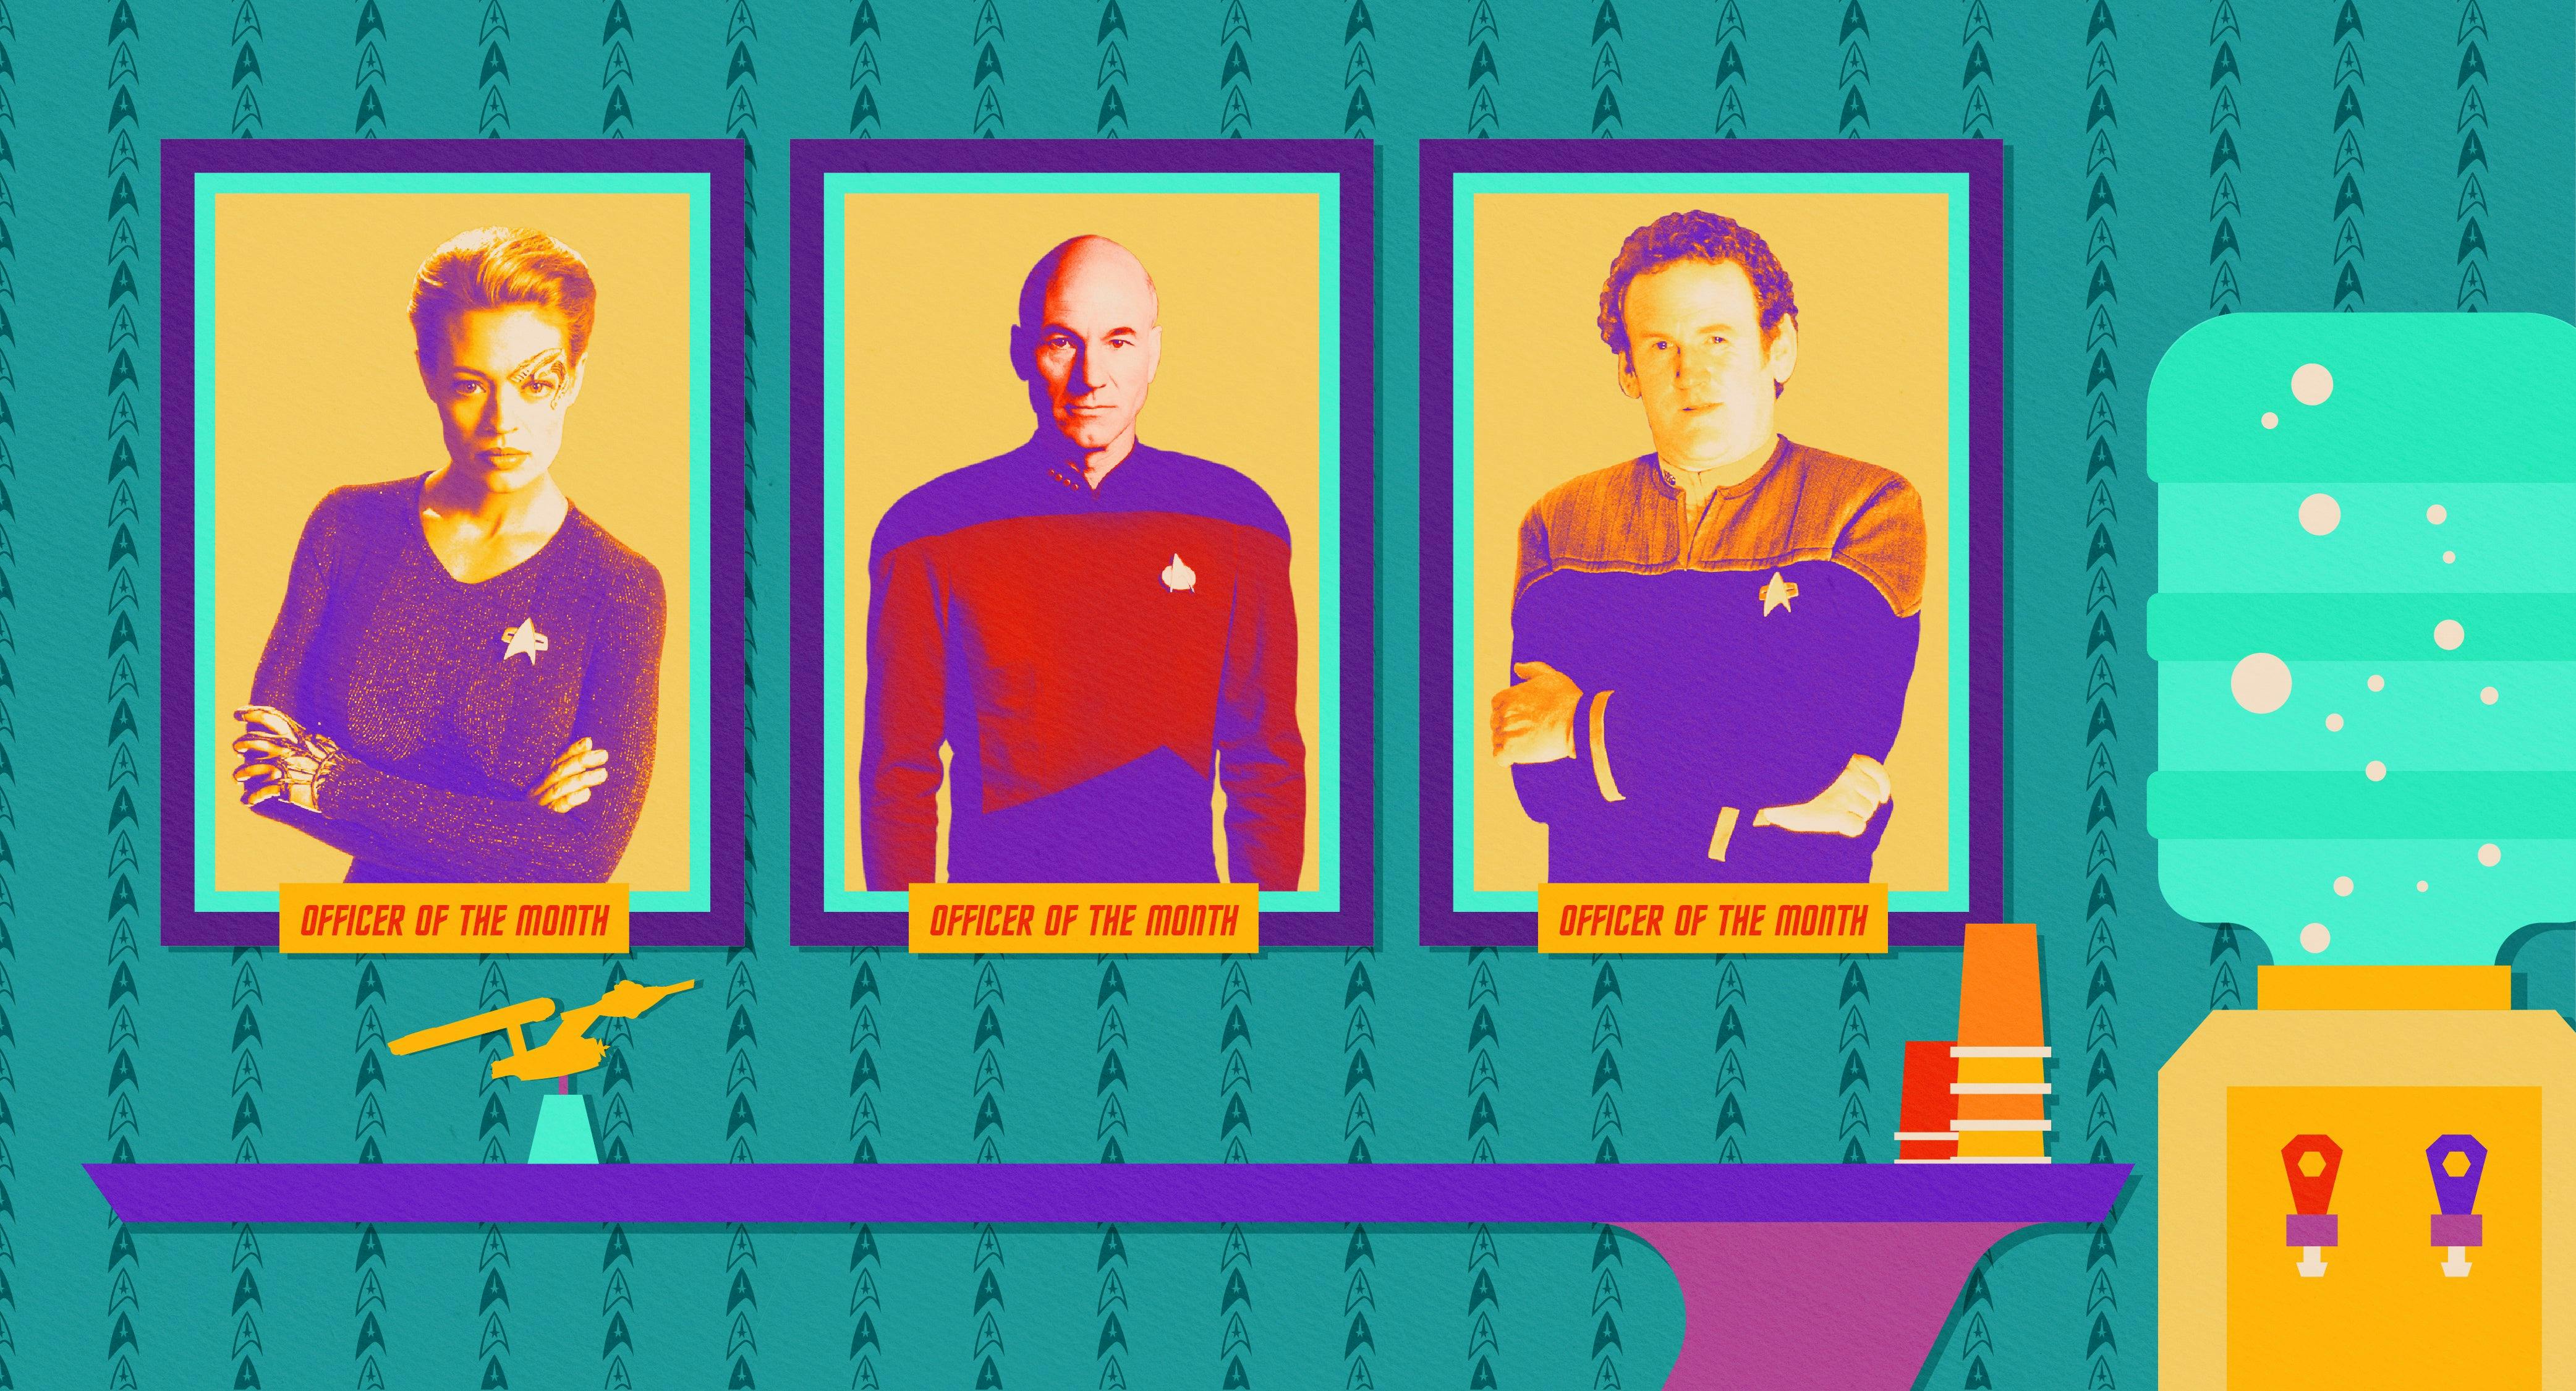 Illustrated banner of an office with a starship model and water cooler. On the wall hang 3 officer of the month portraits - Voyager's Seven of Nine, Enterprise's Jean-Luc Picard, and Deep Space Nine's Miles O'Brien